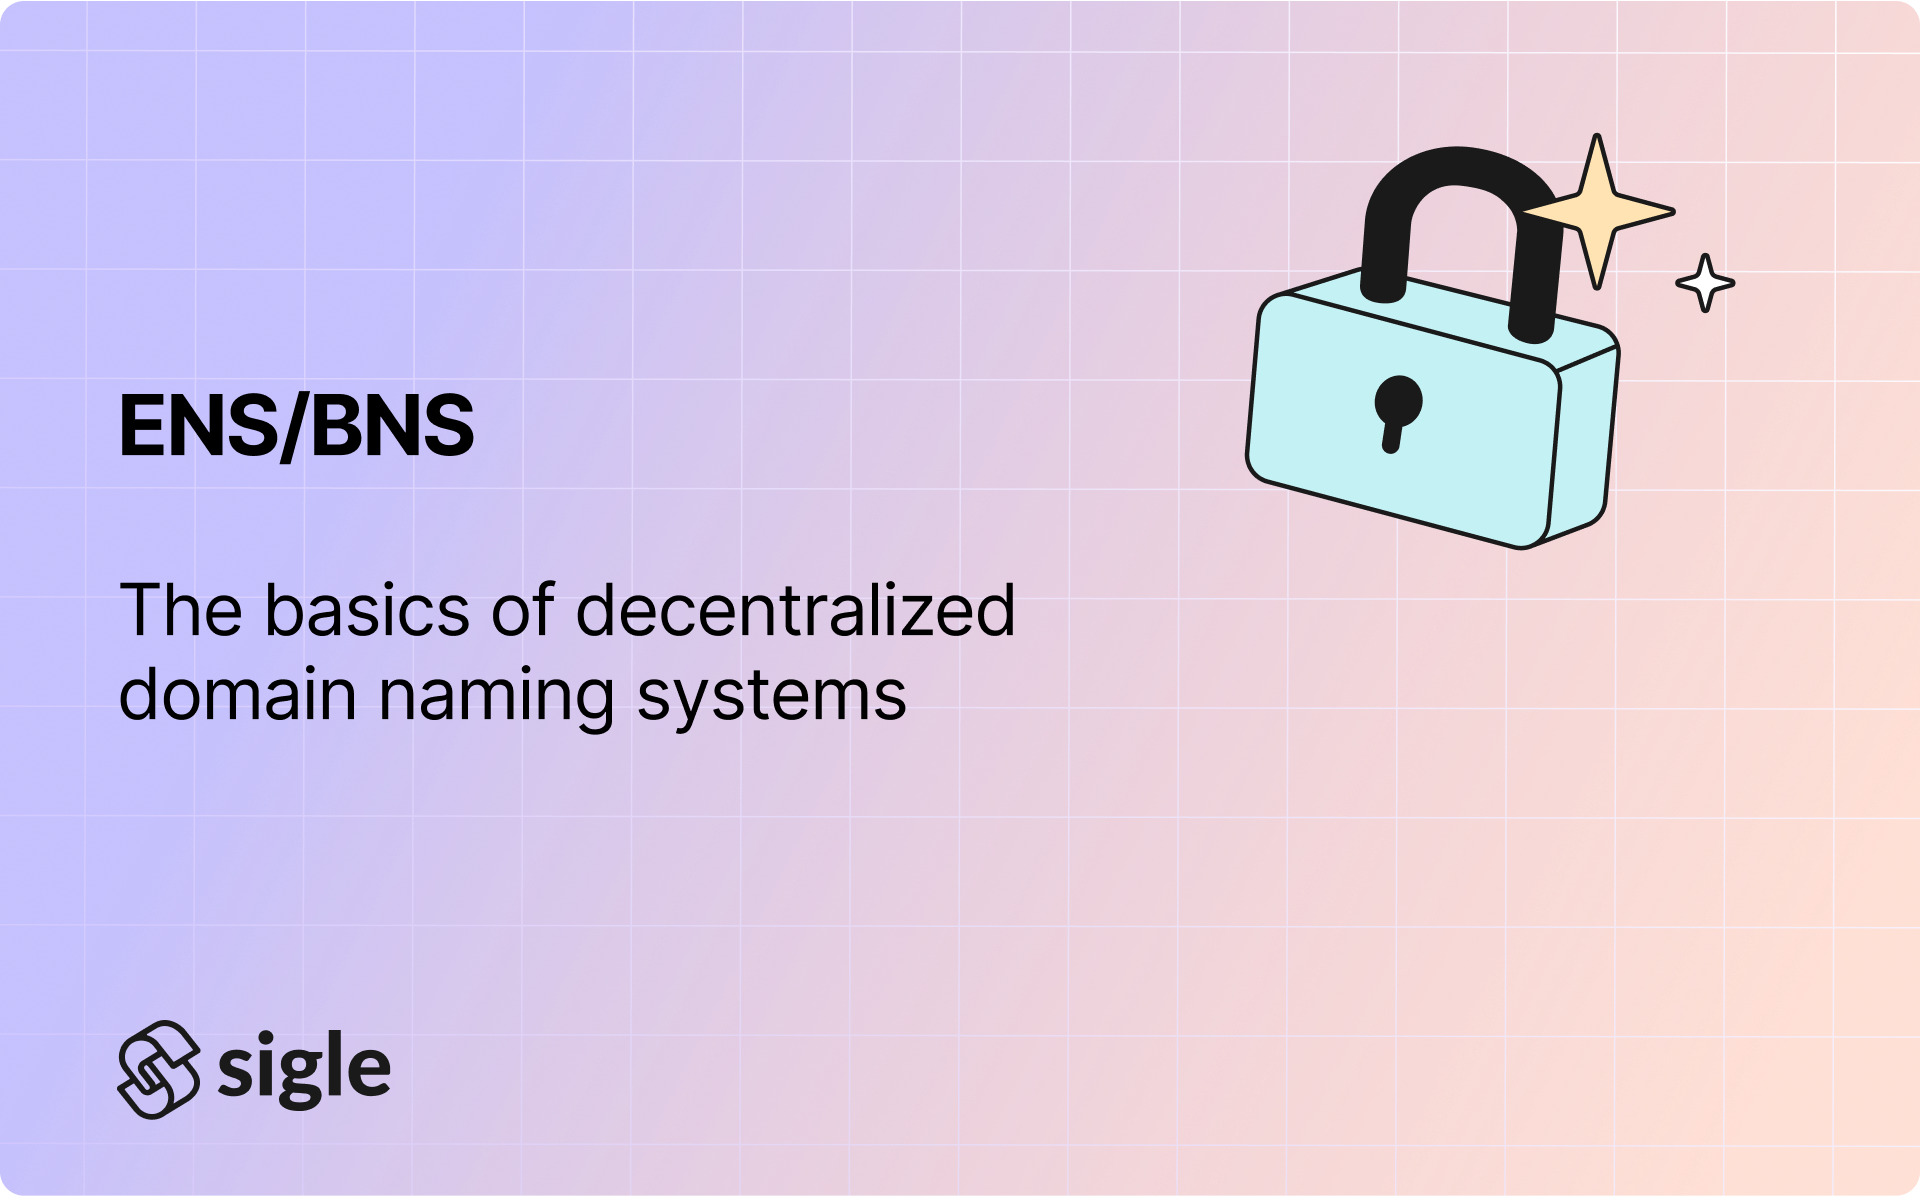 Understanding the basics of decentralized domain naming systems